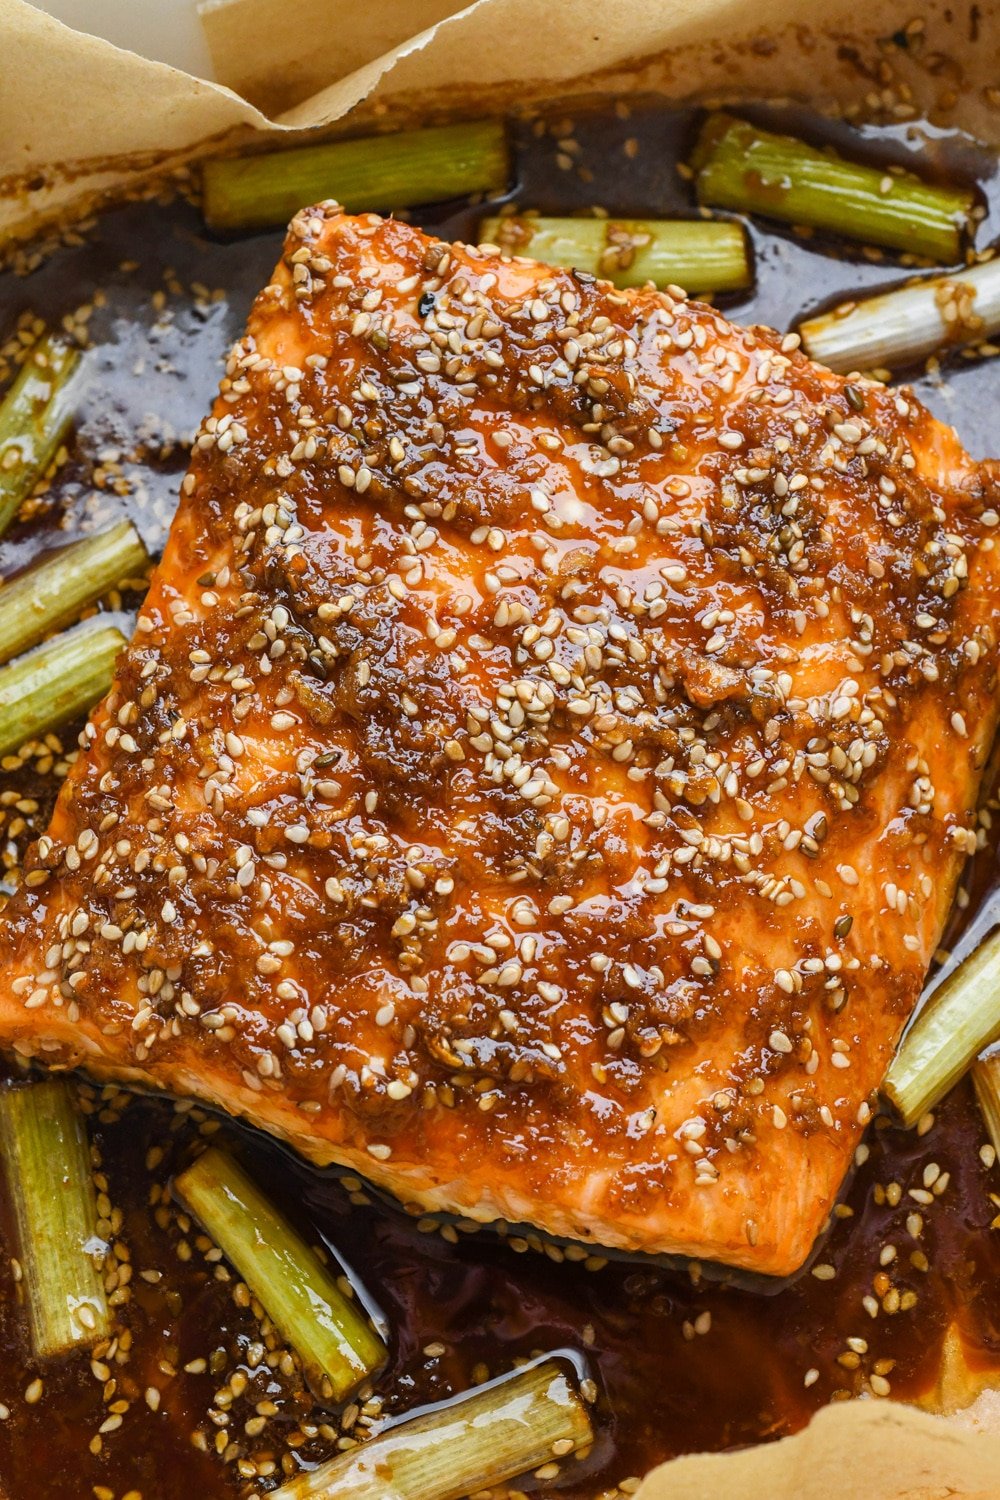 How to make garlic ginger salmon: Baked and glazed salmon filet after coming out of the oven.